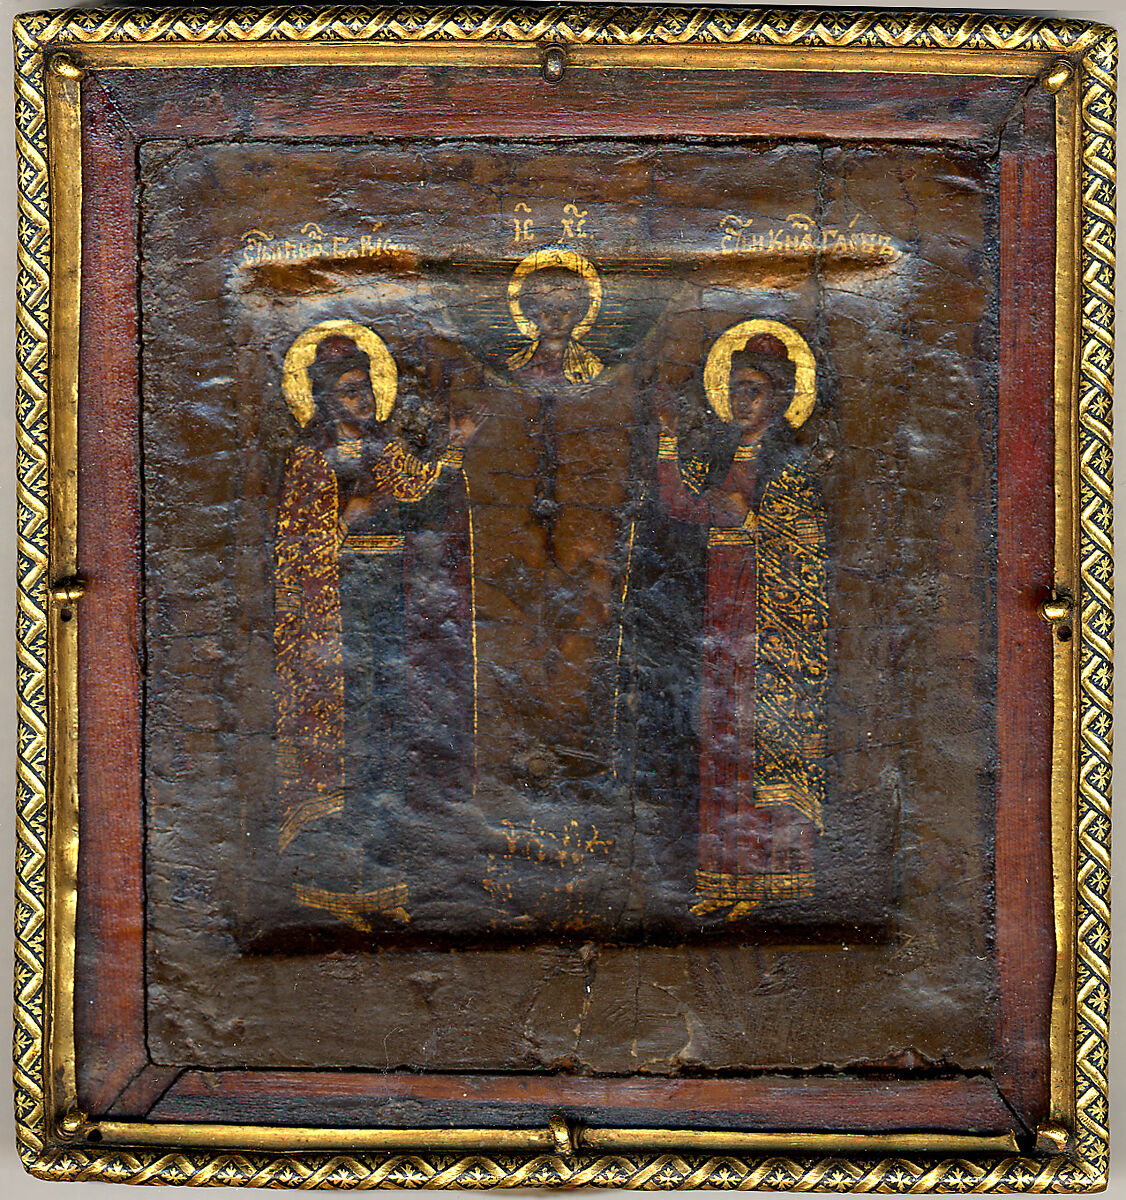 The Christ Child with Saints Boris and Gleb, Russian Painter (16th–18th century), (a) tempera and gold on wood; (b) gold and enamel studded with jewels 